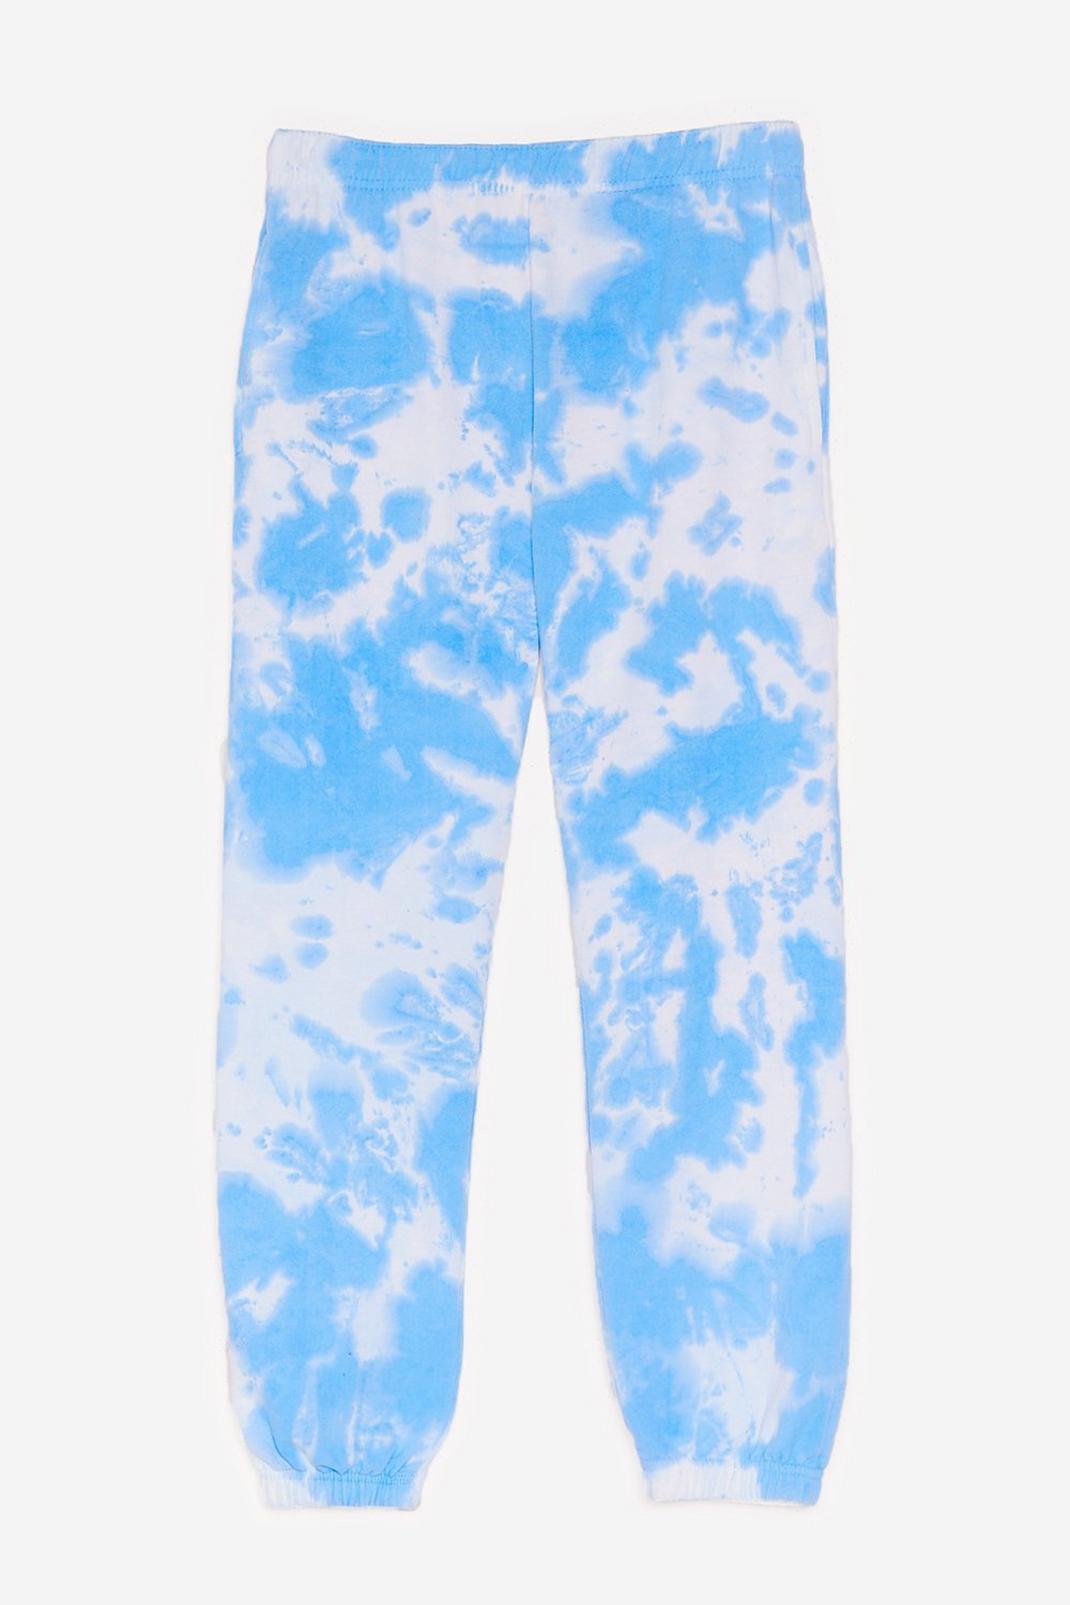 Blue Tie Dye Slouchy High Waisted Tracksuit Pants image number 1